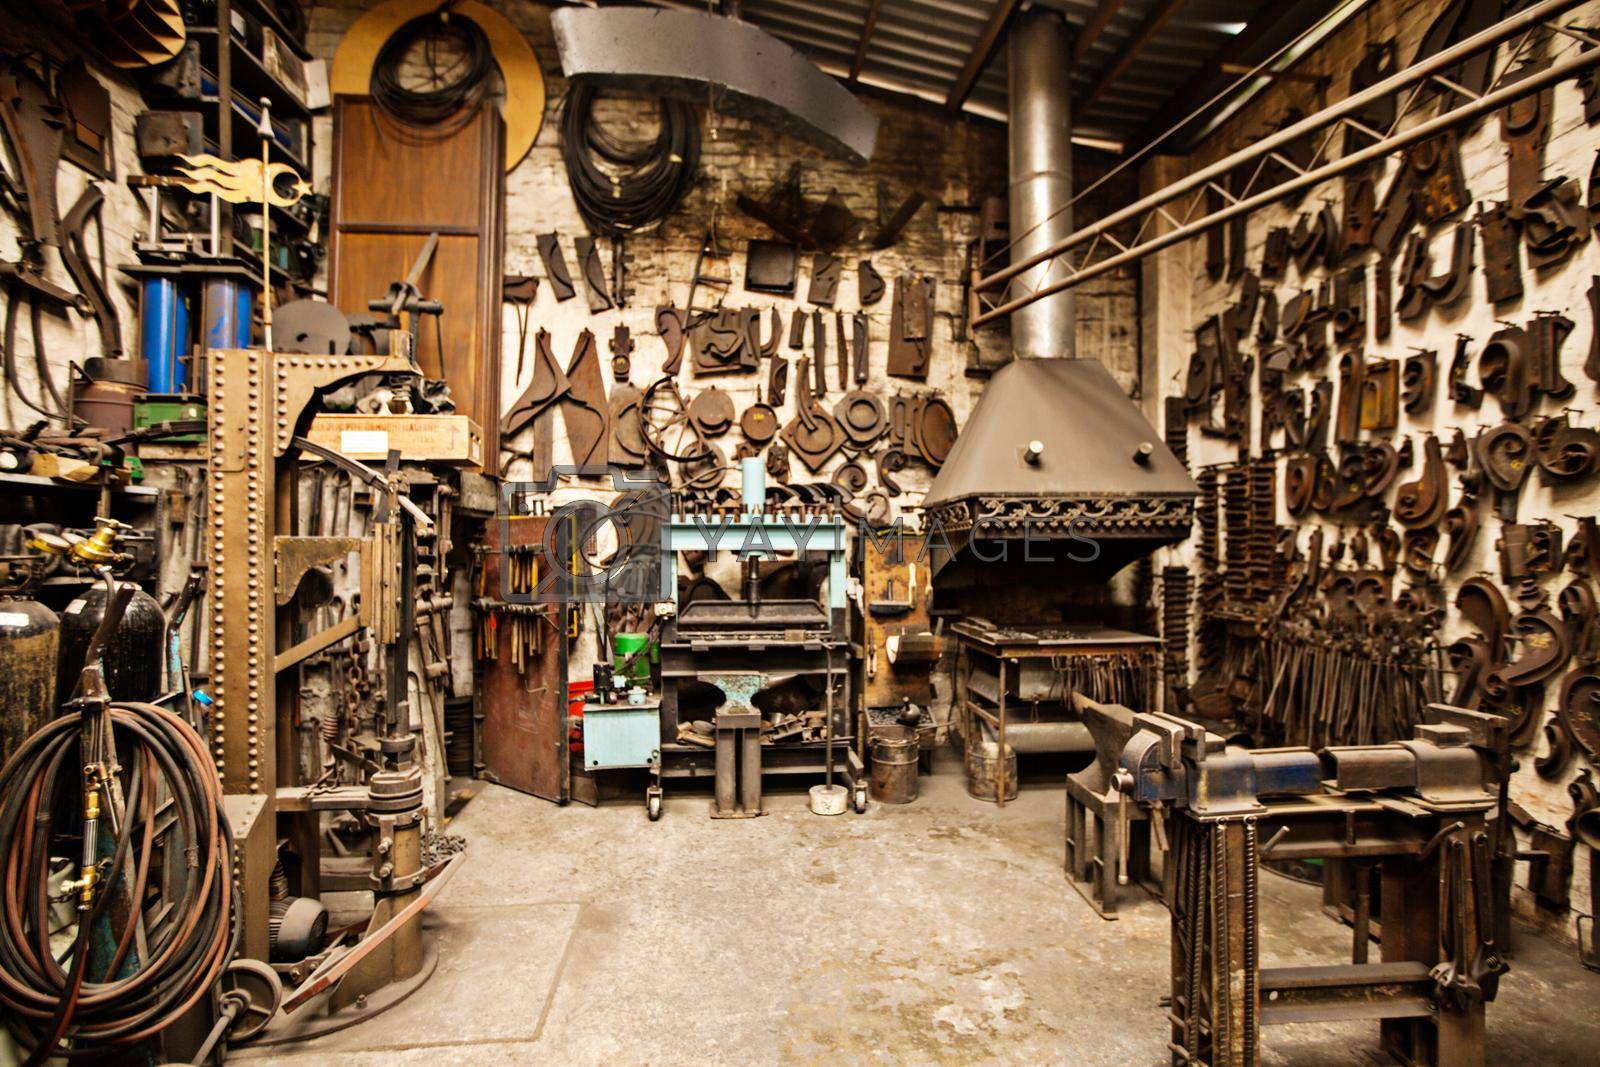 Shot of the interior of a metal shop.